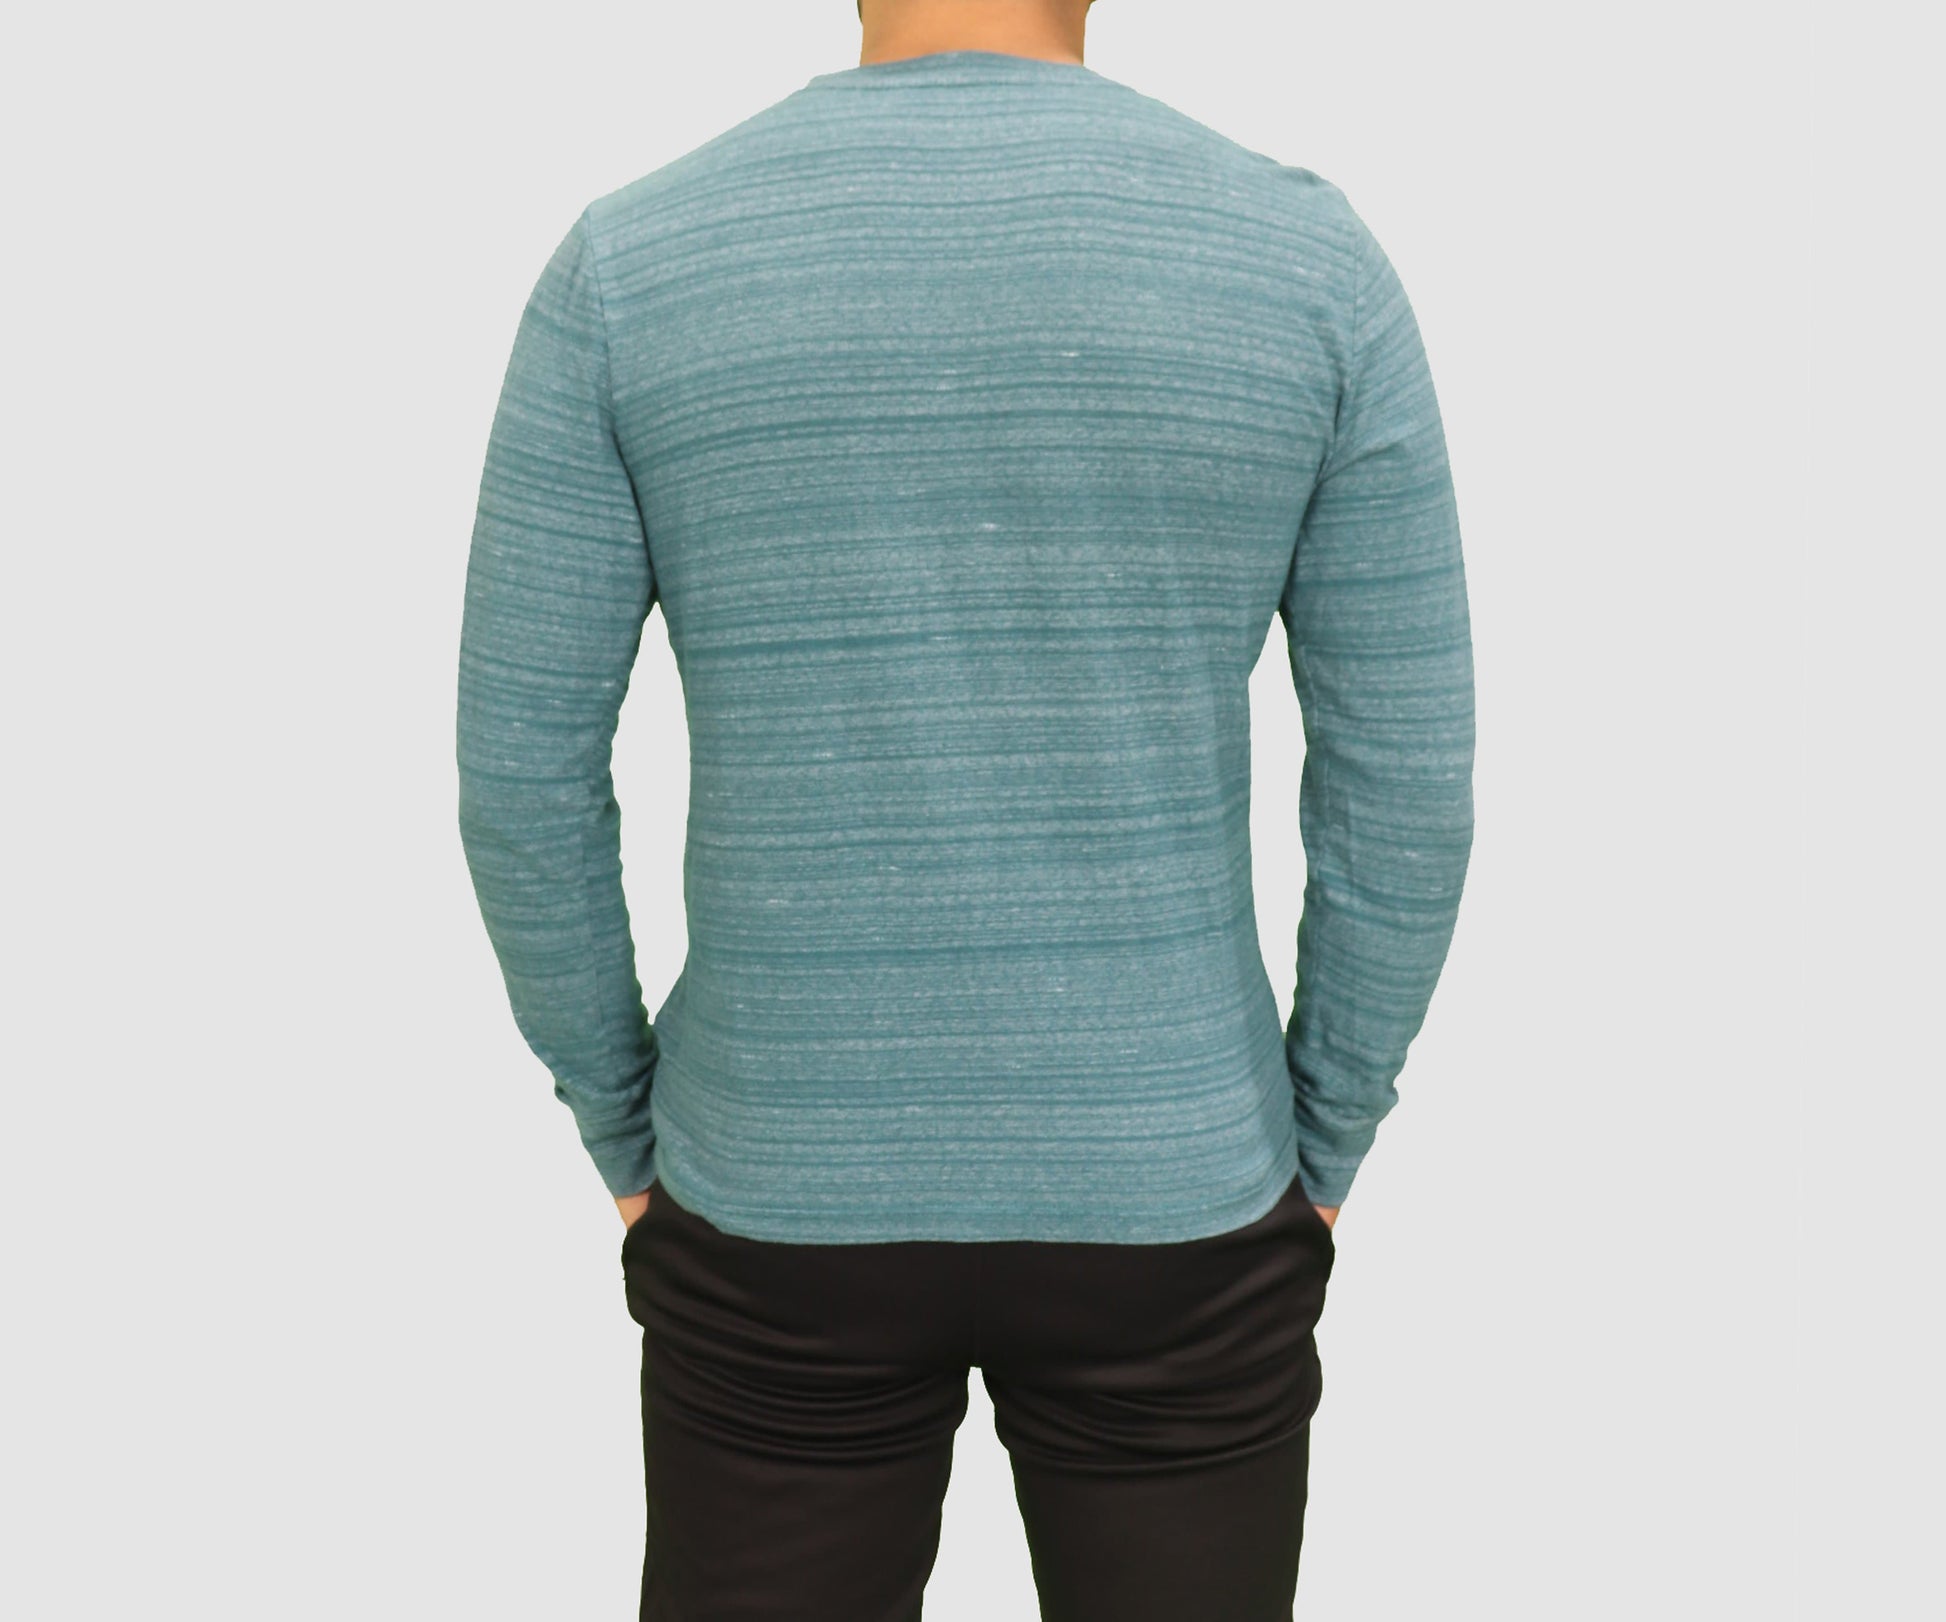 Old Navy Mens Tops Small / Heather Petrol Long Sleeve Top